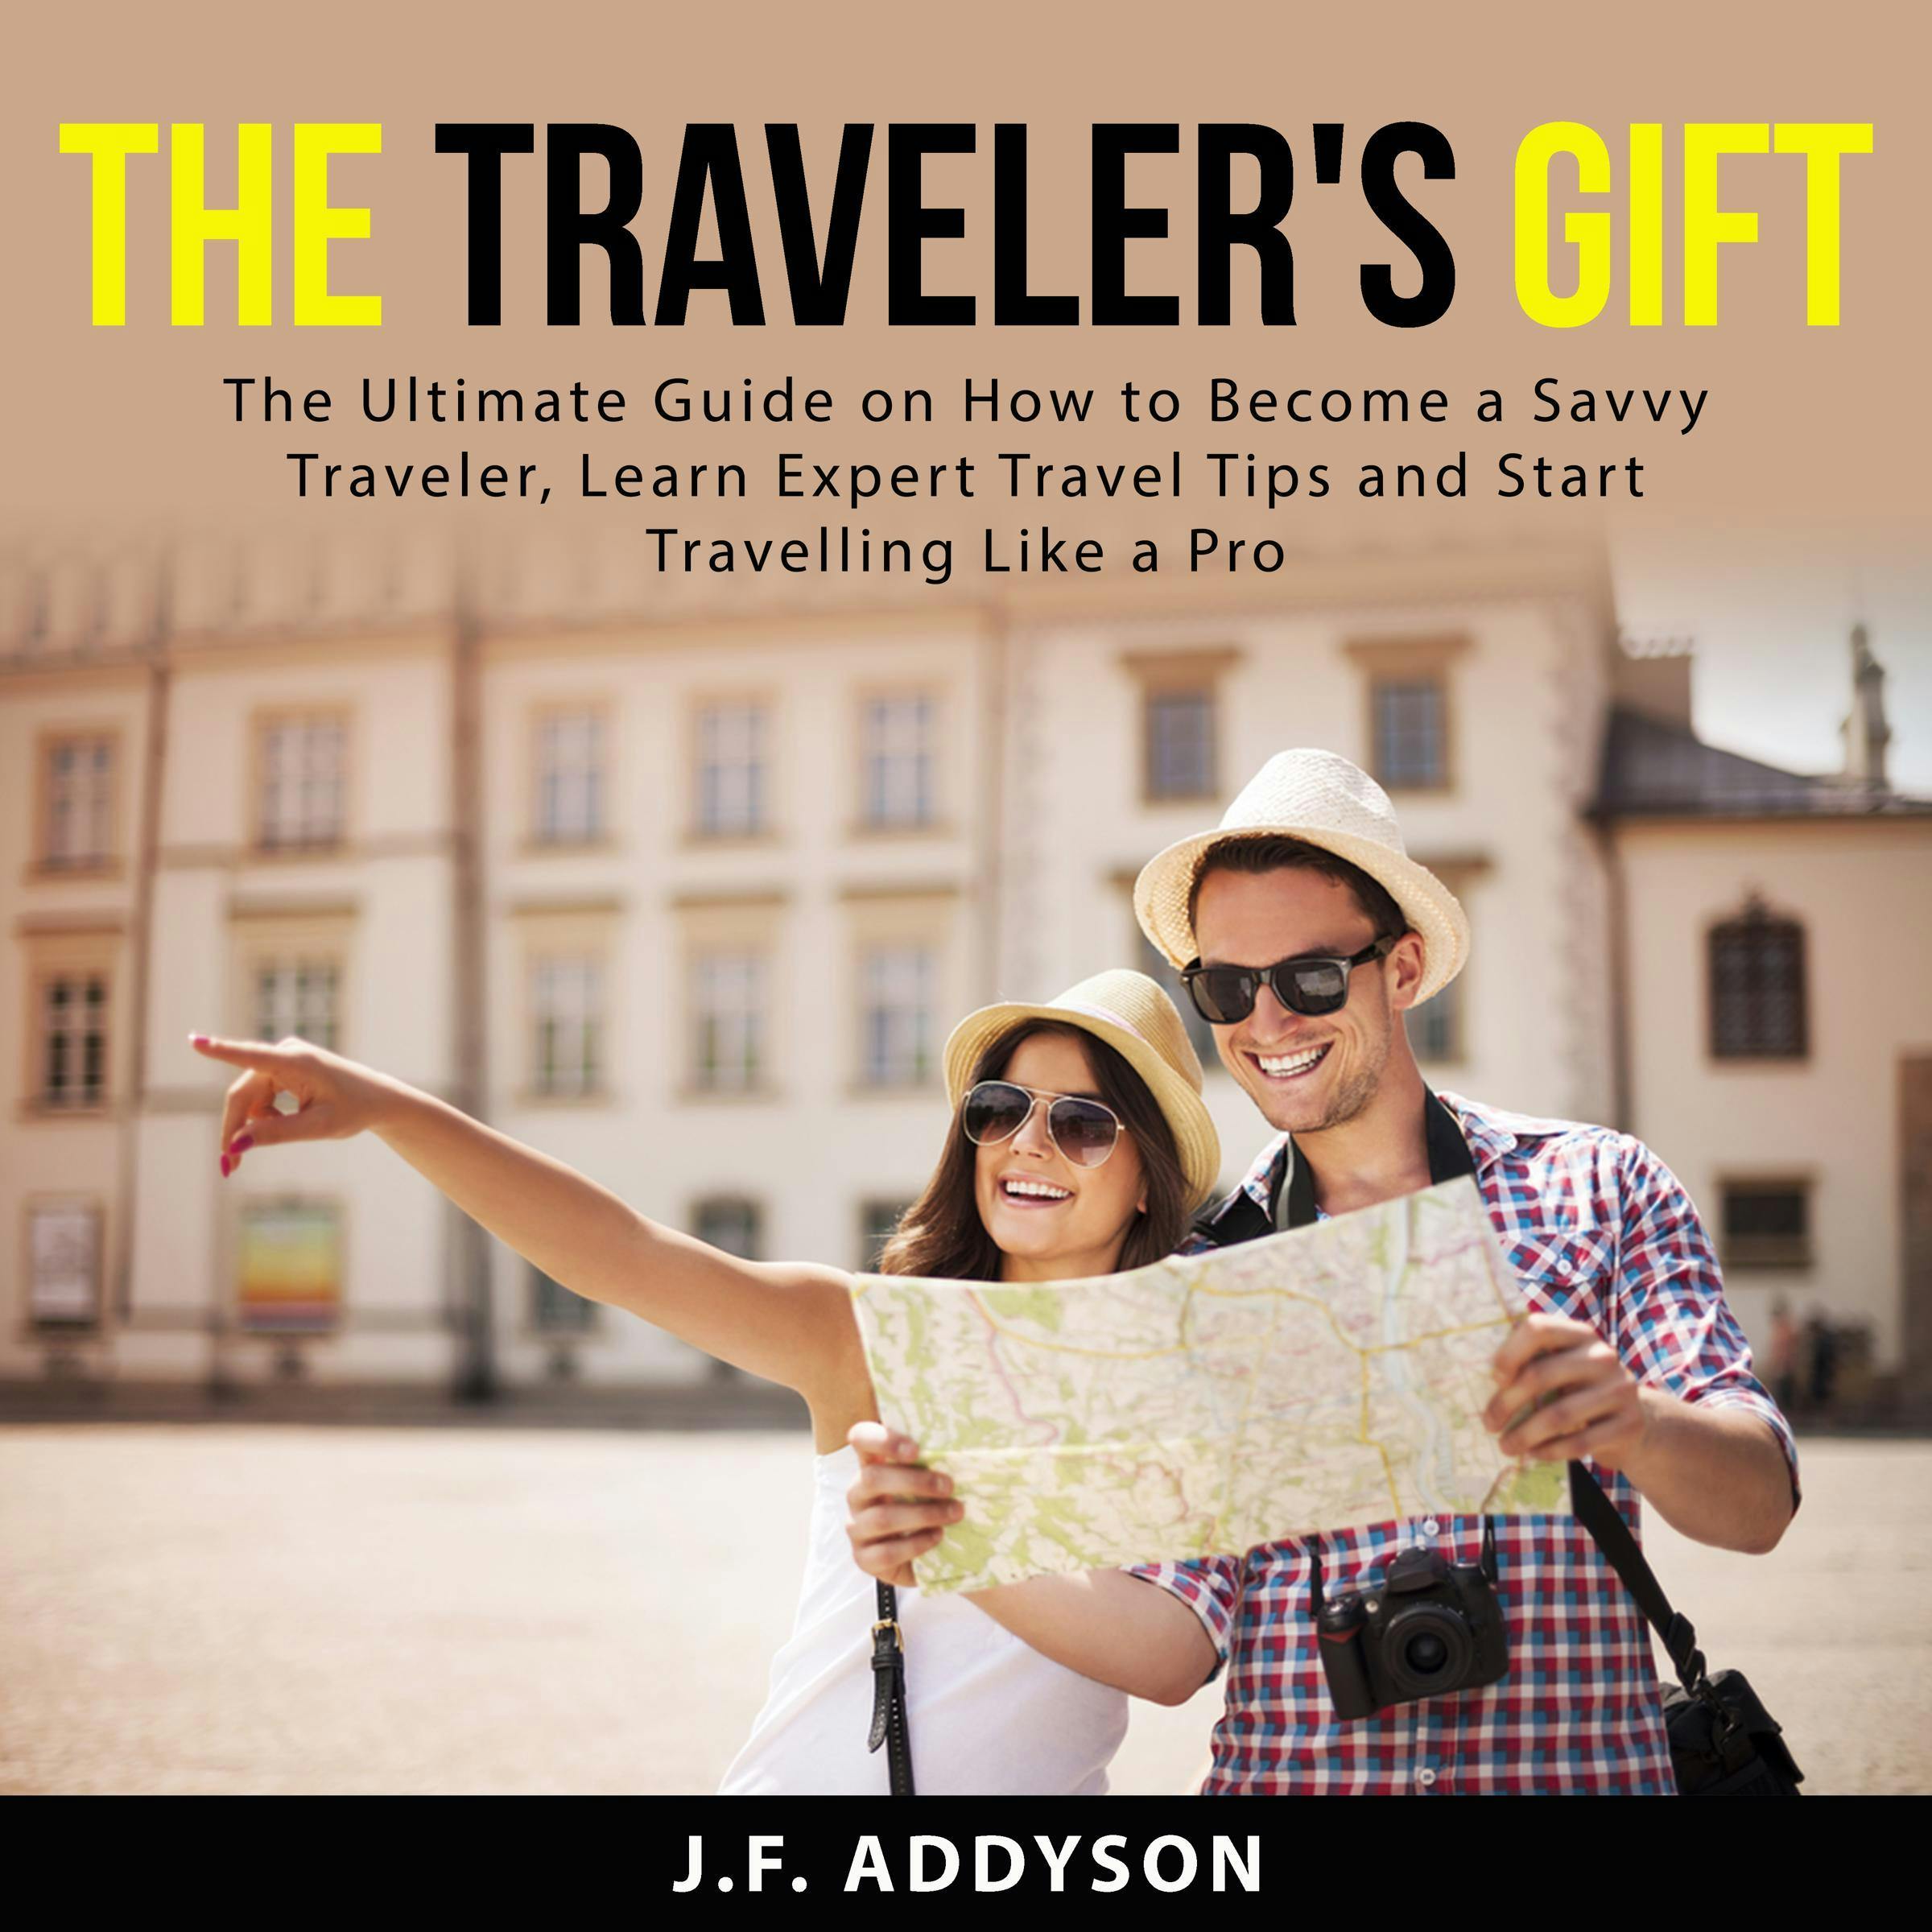 The Traveler's Gift: The Ultimate Guide on How to Become a Savvy Traveler, Learn Expert Travel Tips and and Start Travelling Like a Pro - J.F. Addyson